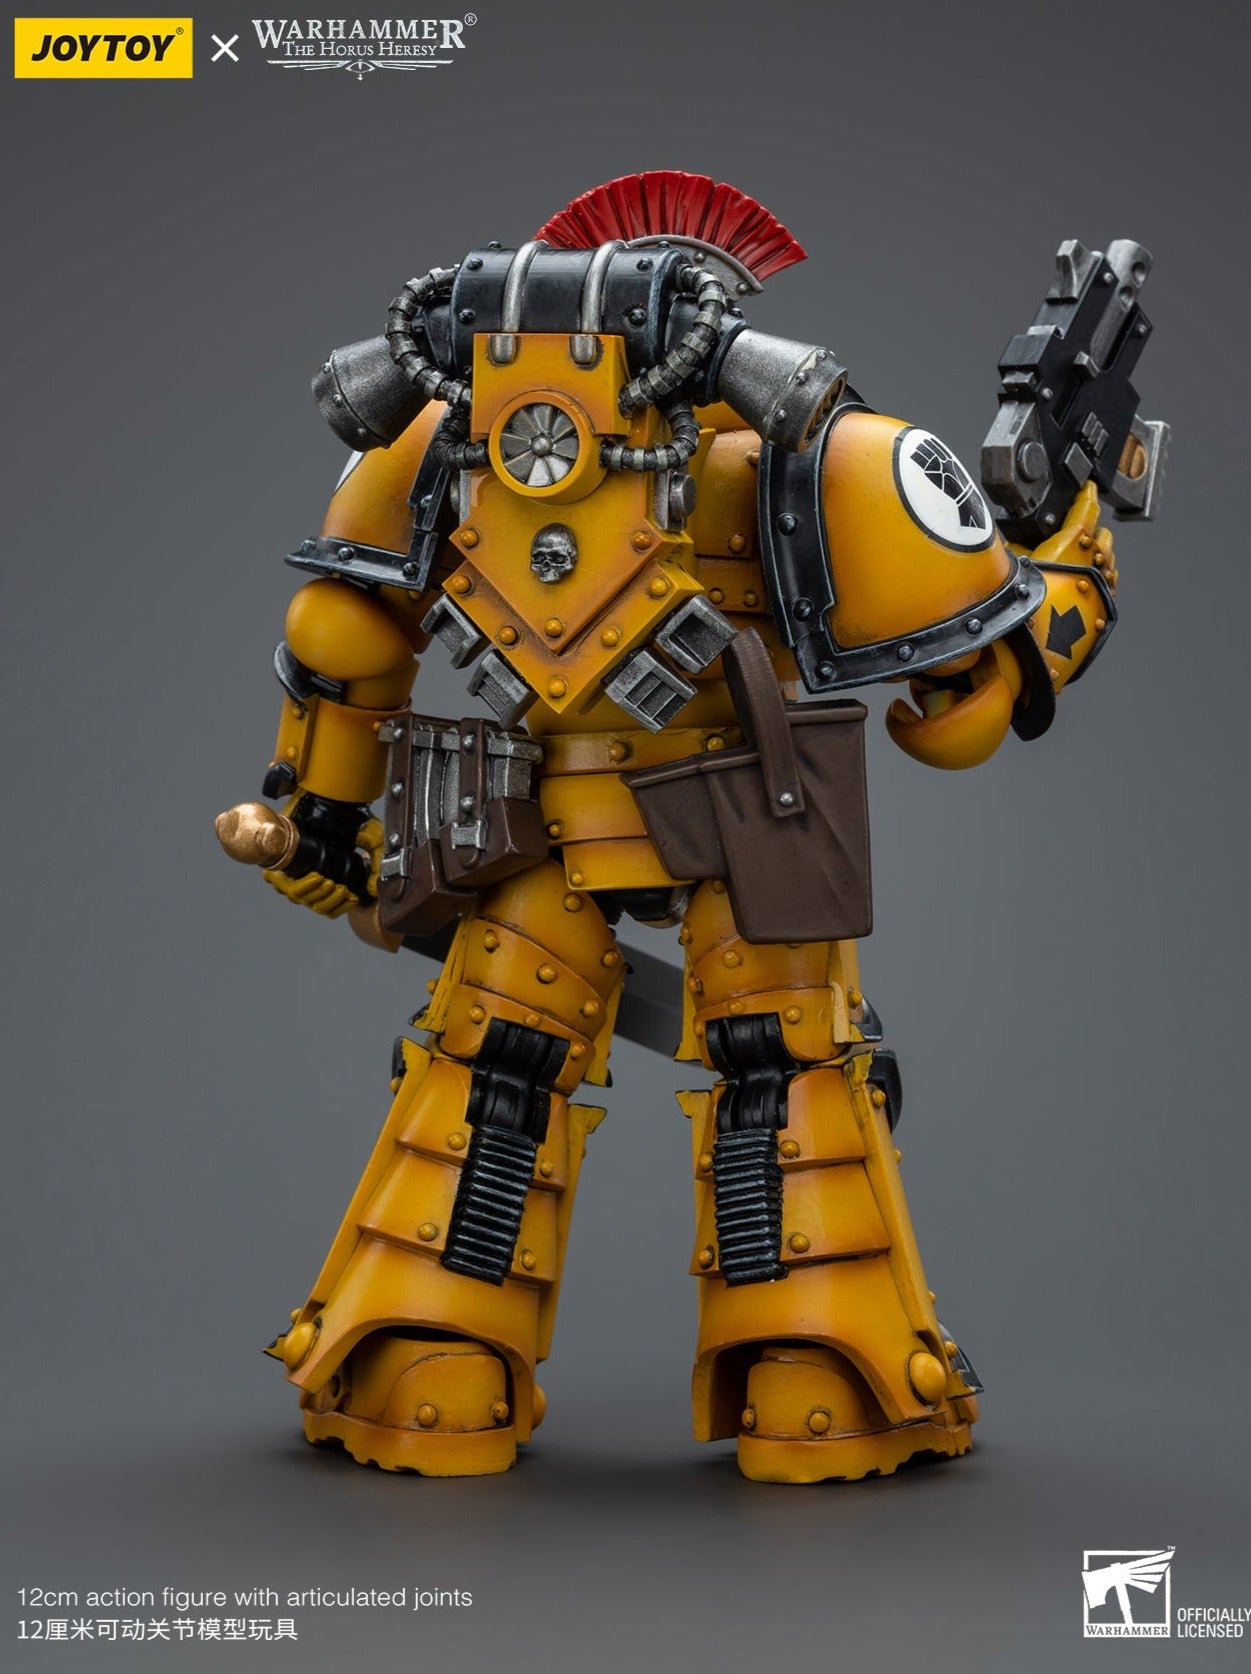 Warhammer: The Horus Hersey: Imperial Fists: Legion MkIII Tactical Squad Sergeant with Power Sword-Joy Toy